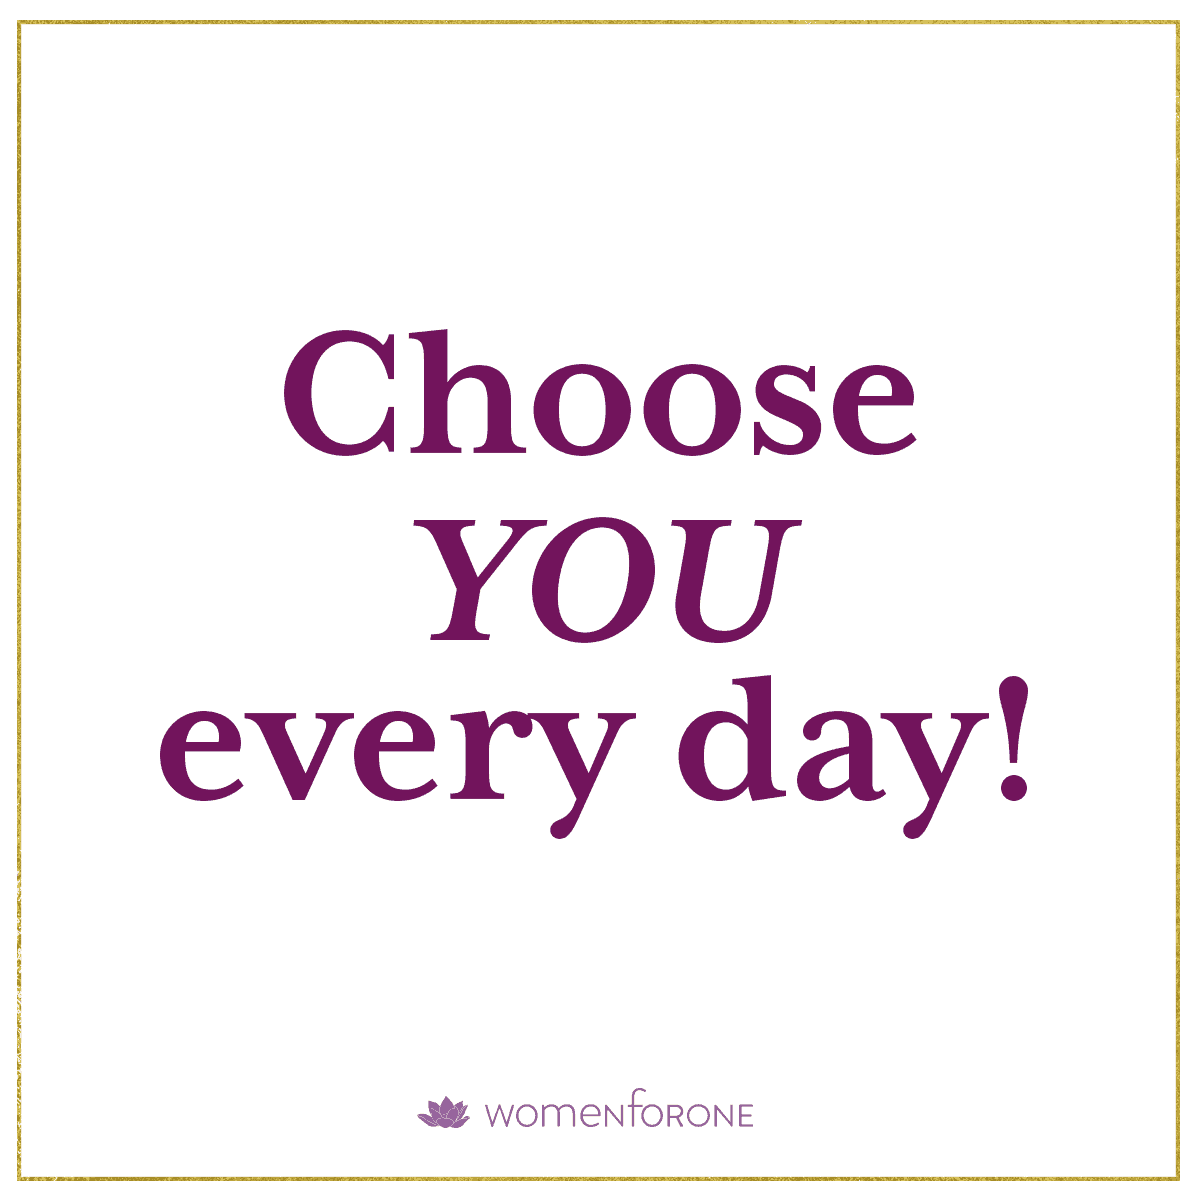 Choose YOU every day!